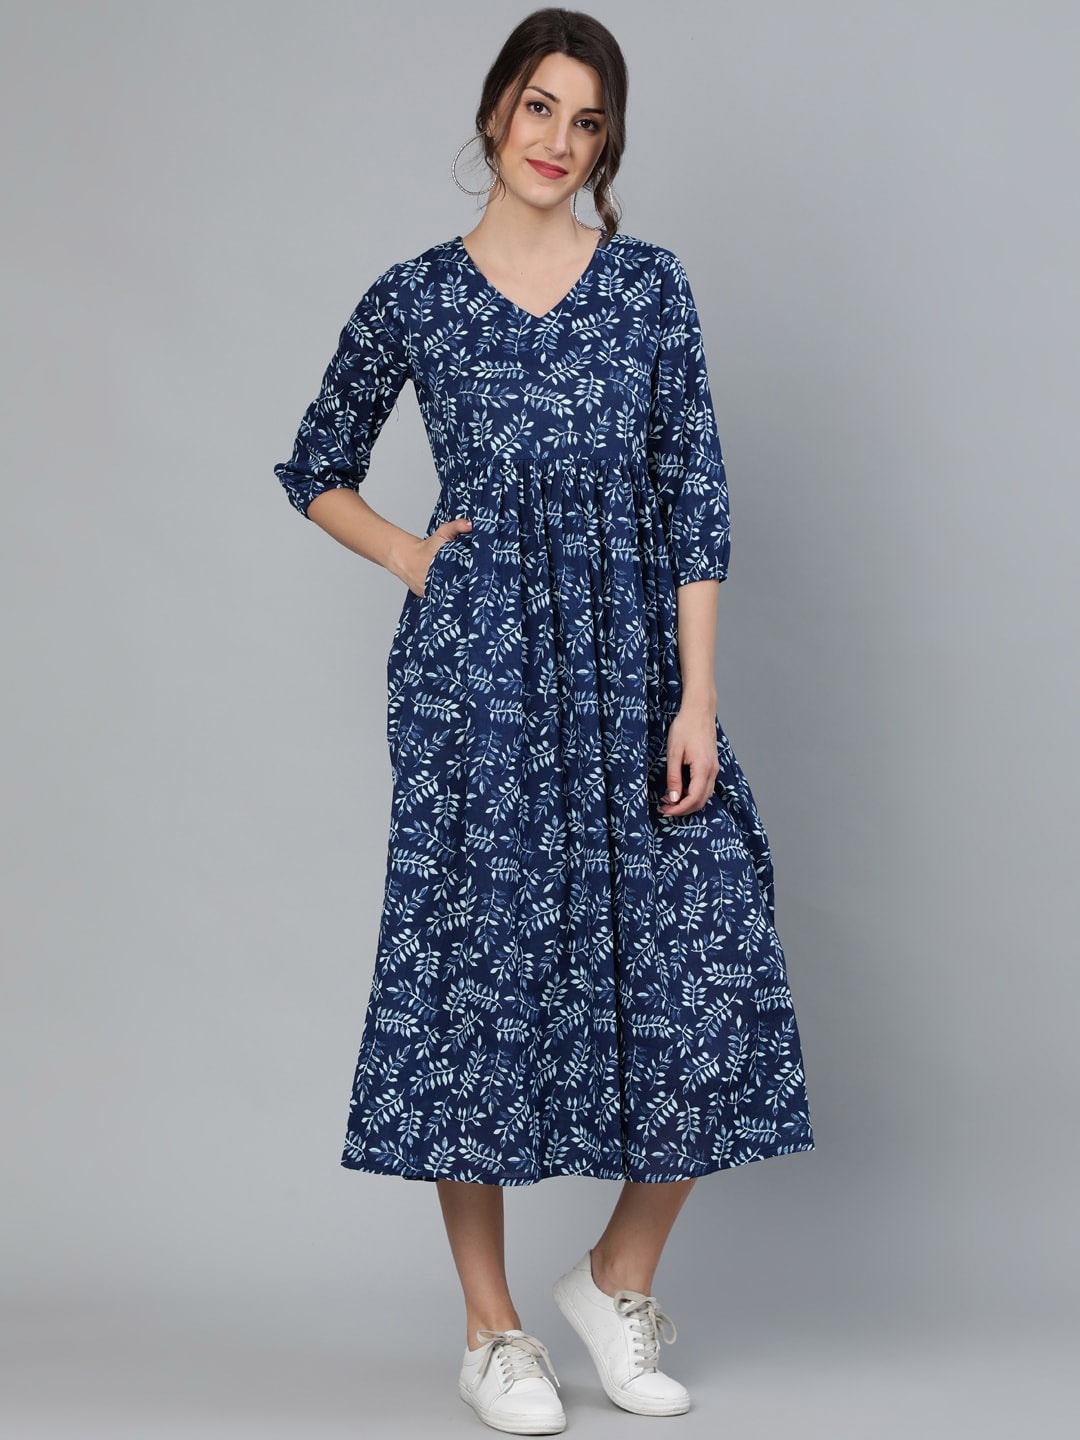 Nayo Blue Tropical Fit and Flare Cotton Dress Price in India